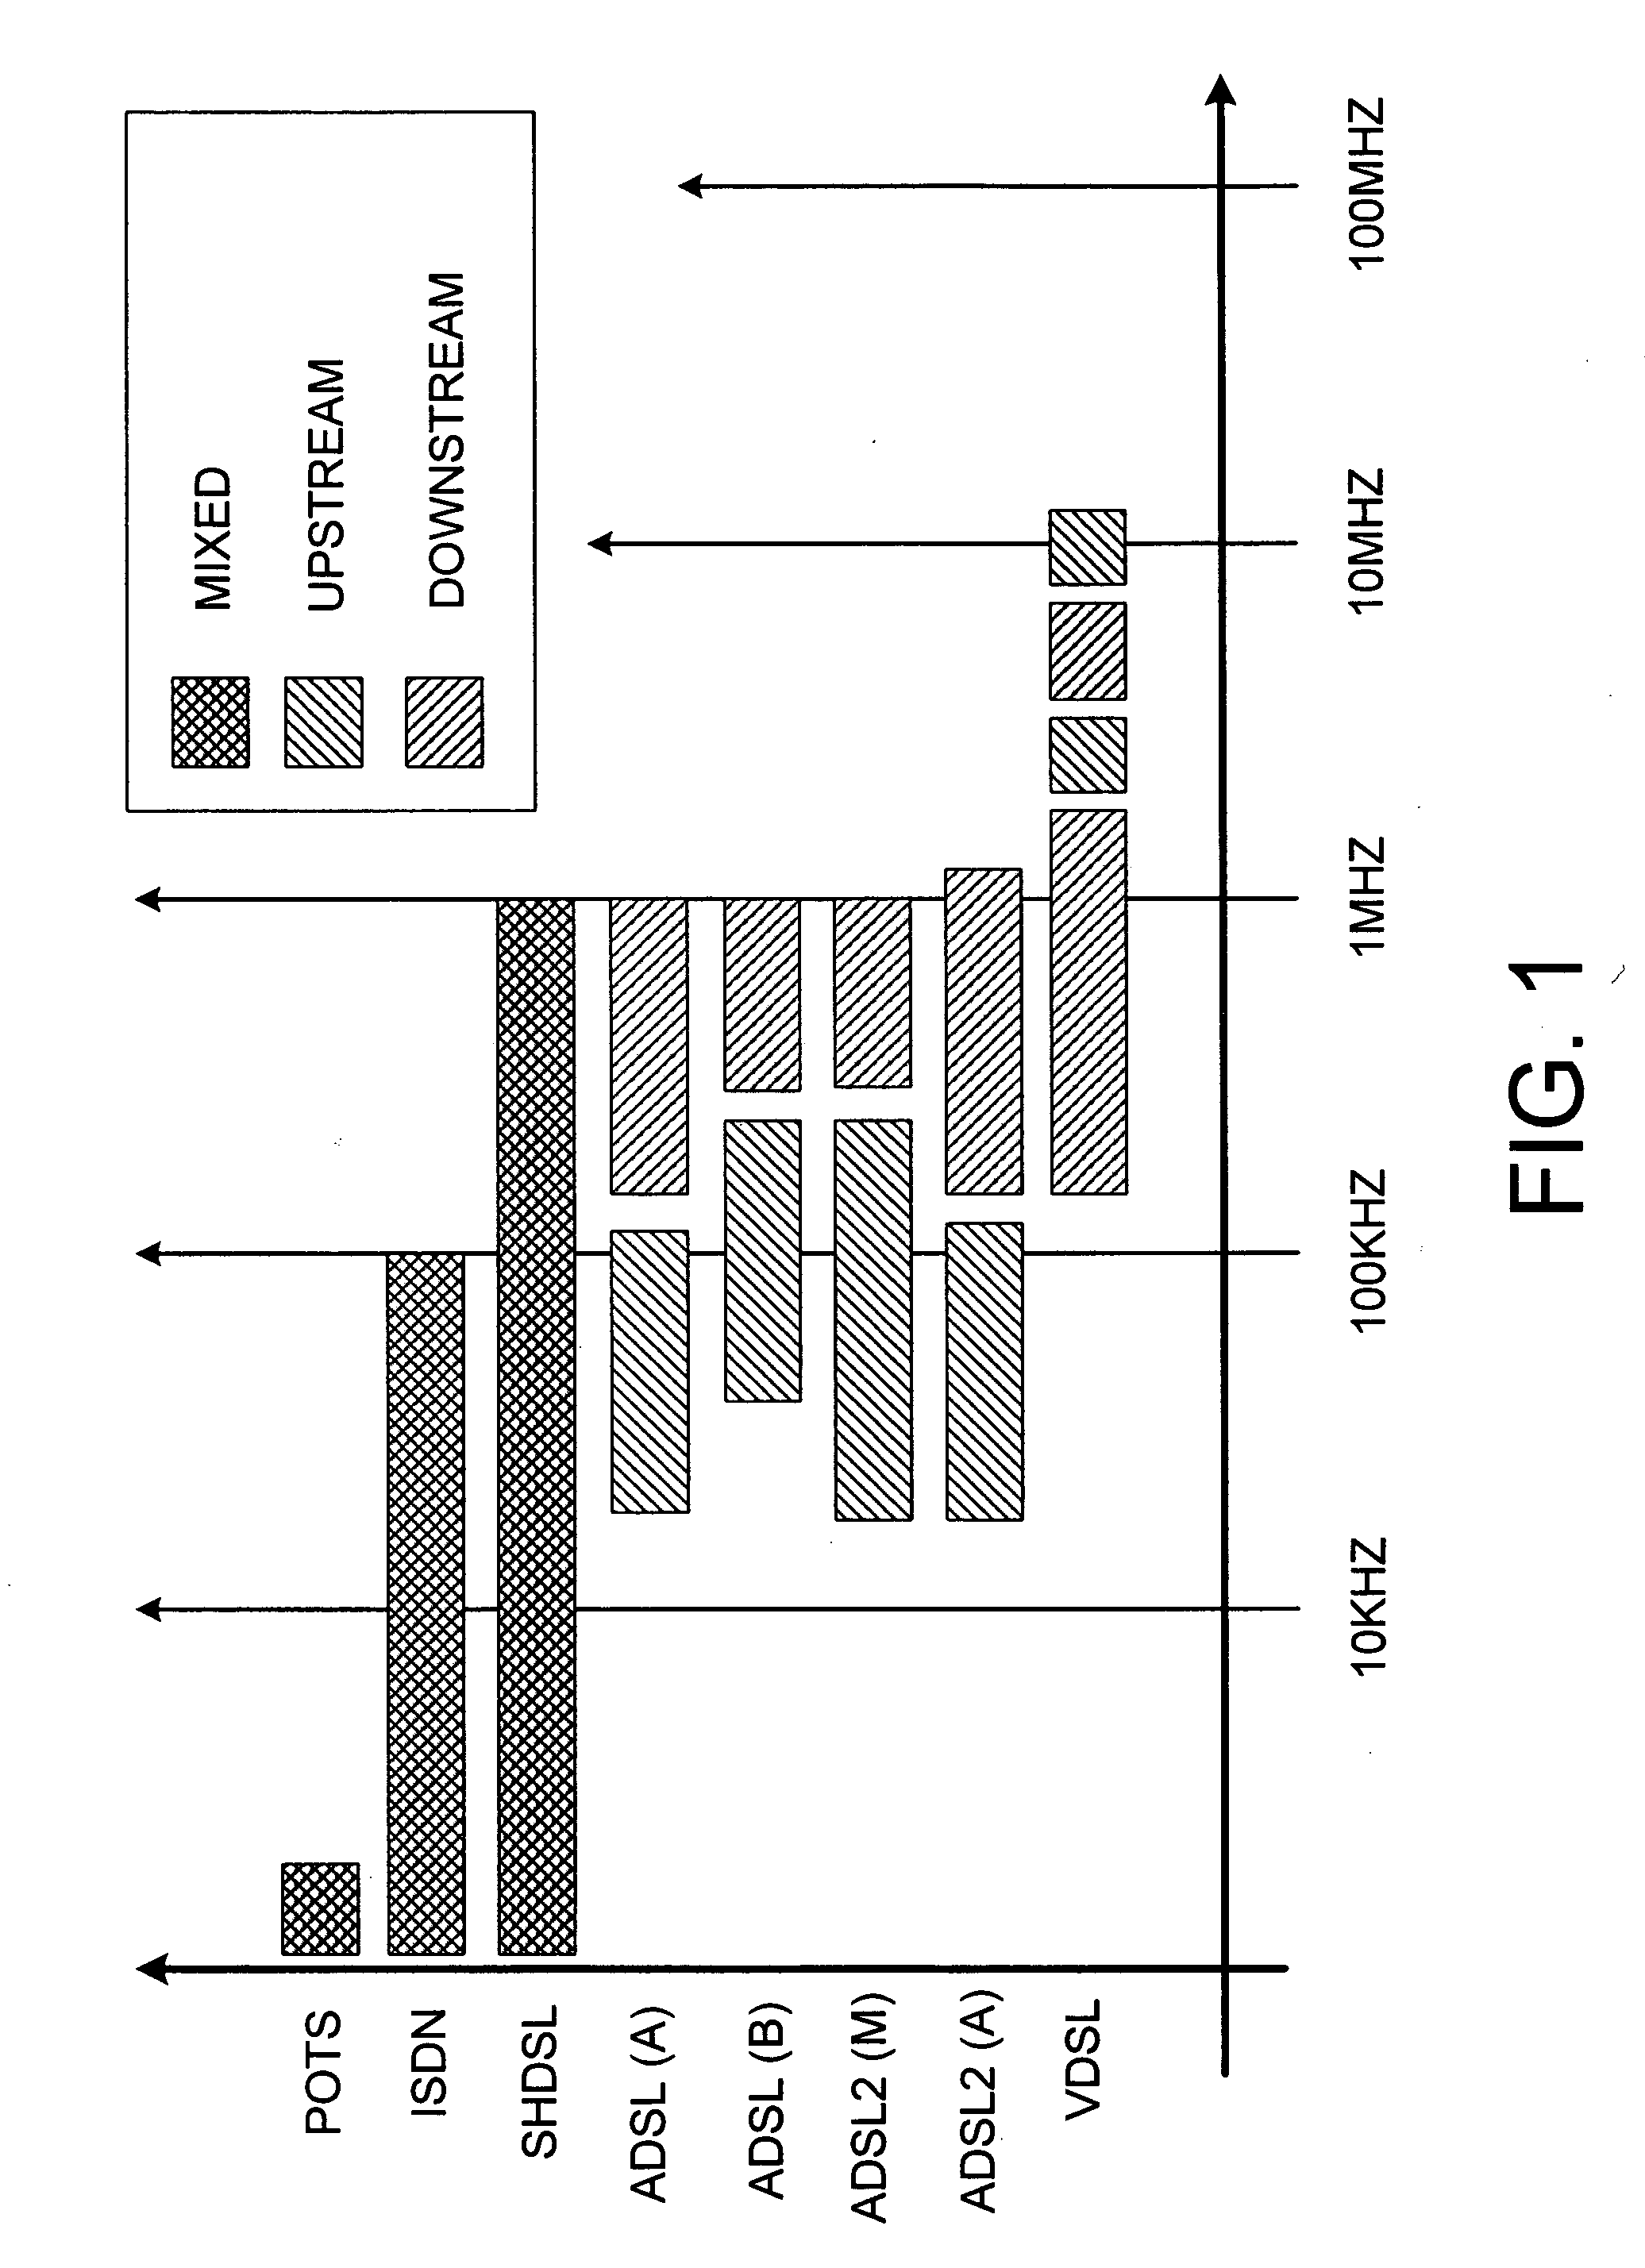 Local area network above telephony methods and devices